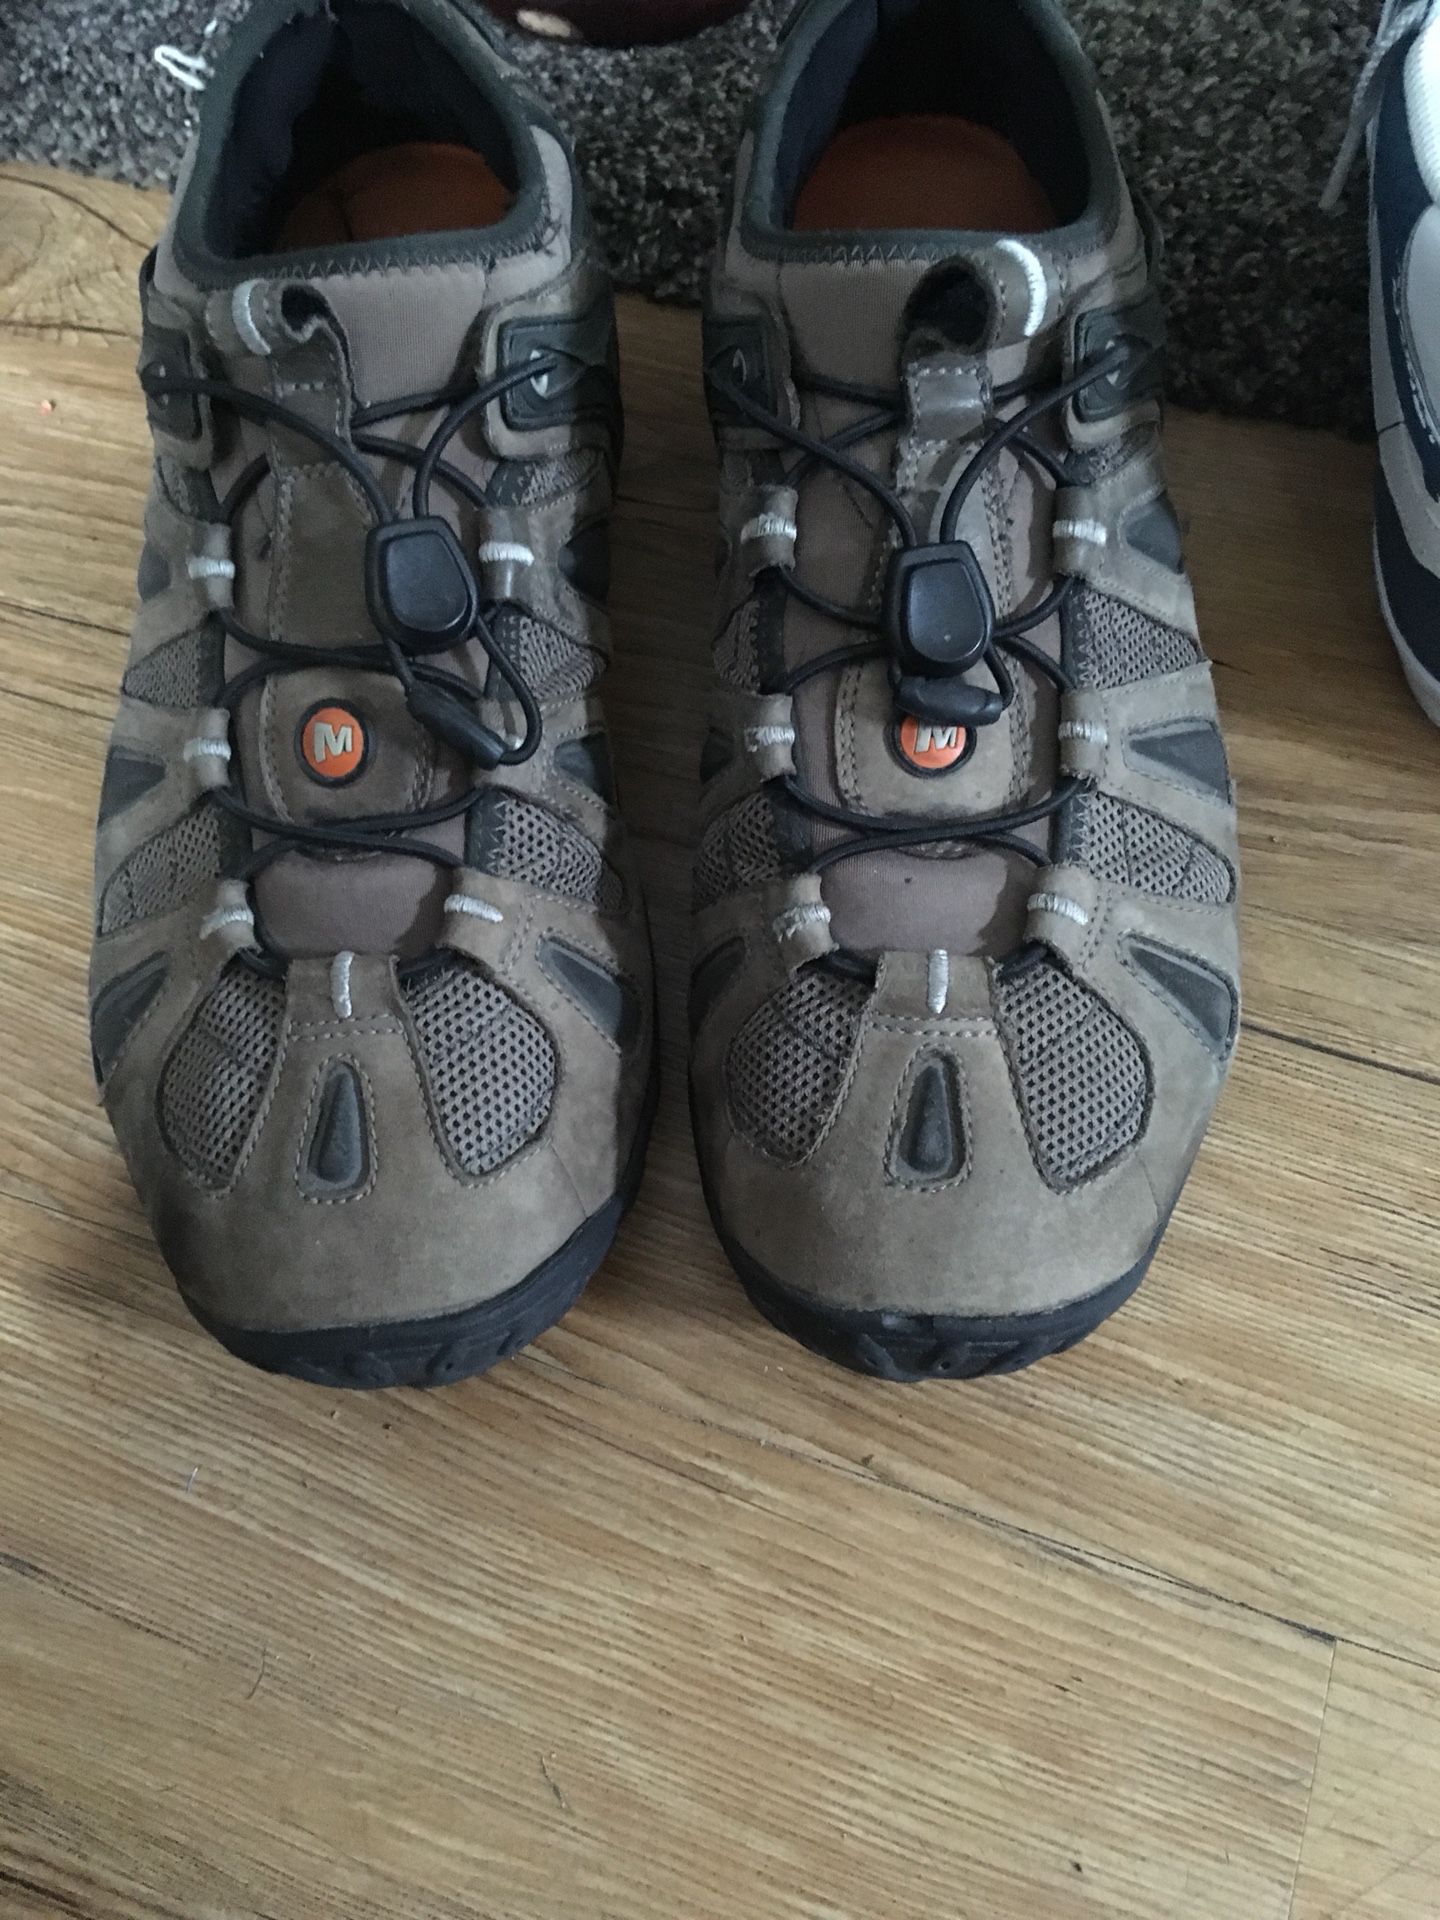 Merrell shoes size 13